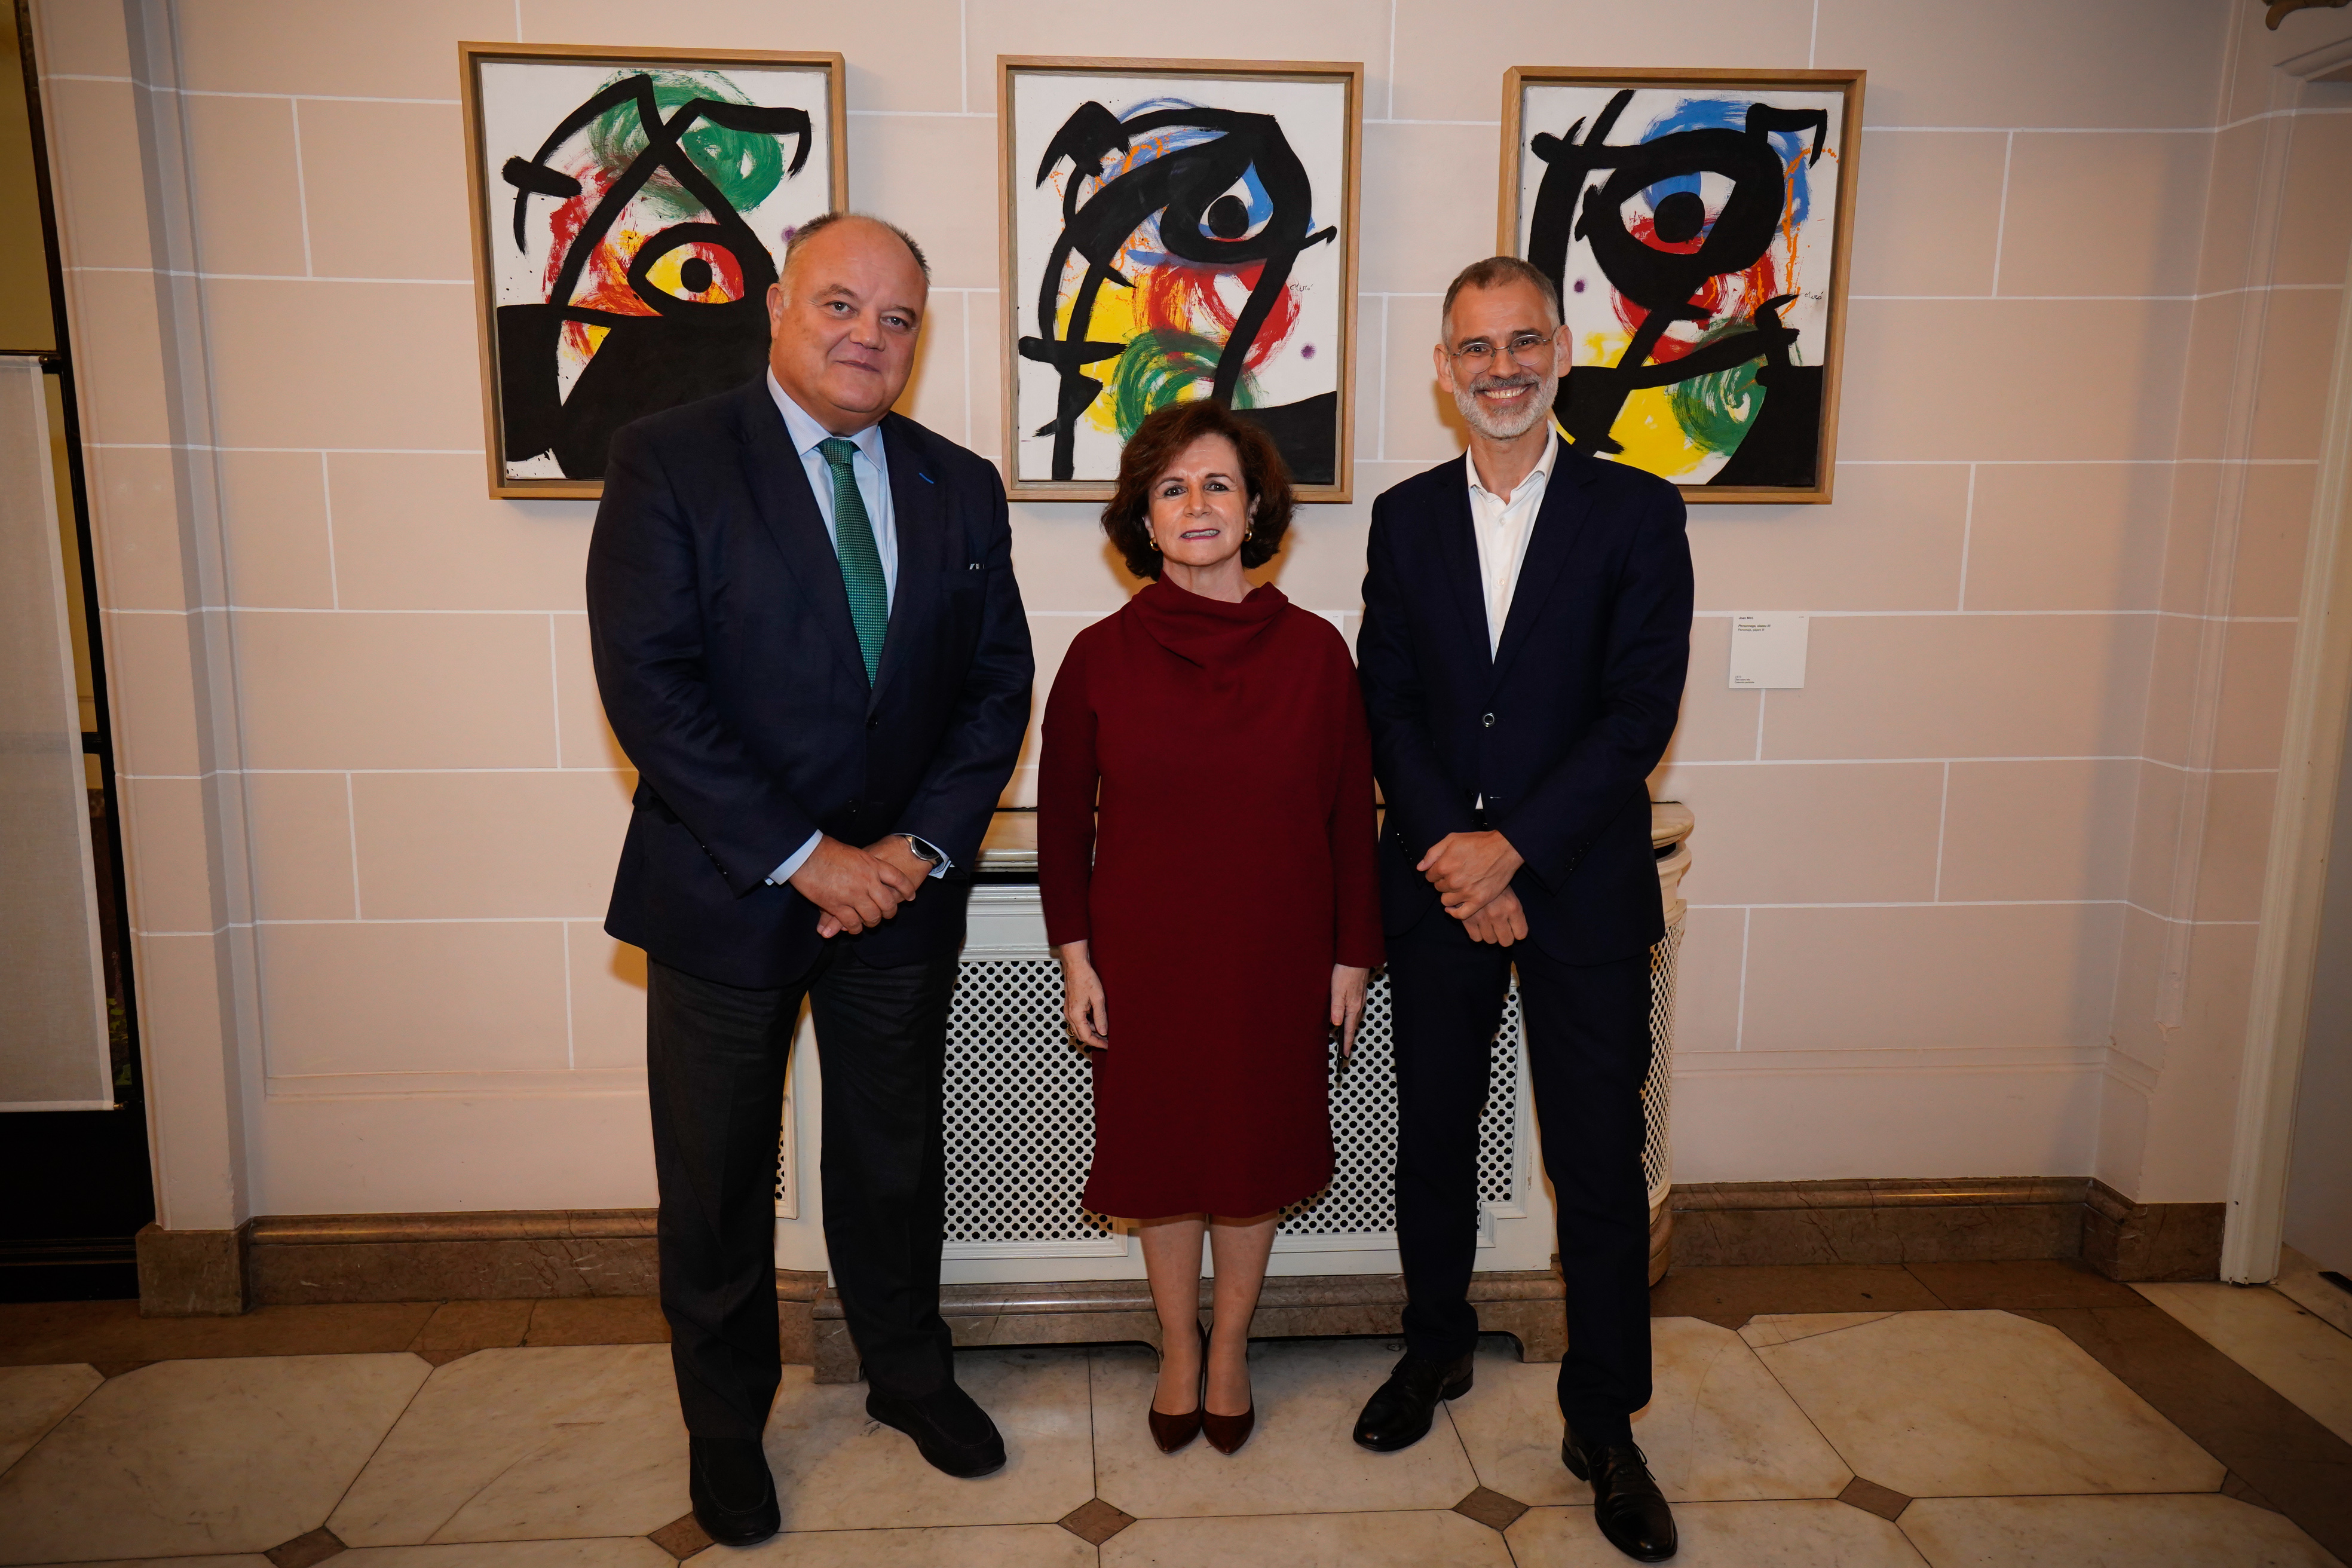 The traveling exhibition of Miró organized by the Abertis Foundation, the Fundació Joan Miró and the Ministry of Foreign Affairs, arrives in Brussels (Belgium)